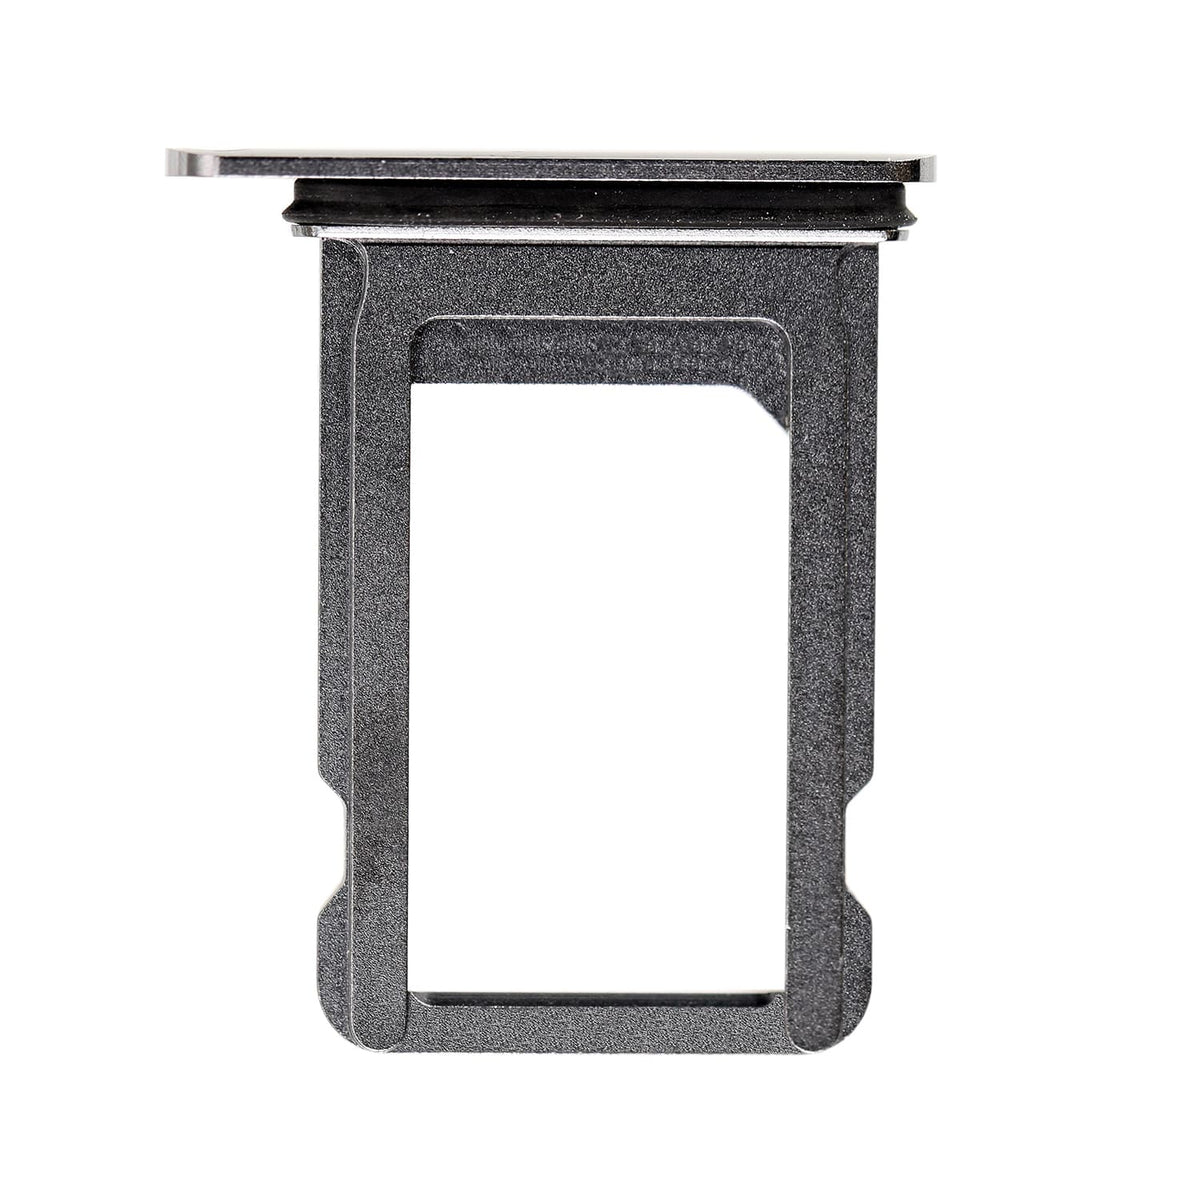 SIM CARD TRAY - SPACE GRAY FOR IPHONE XS